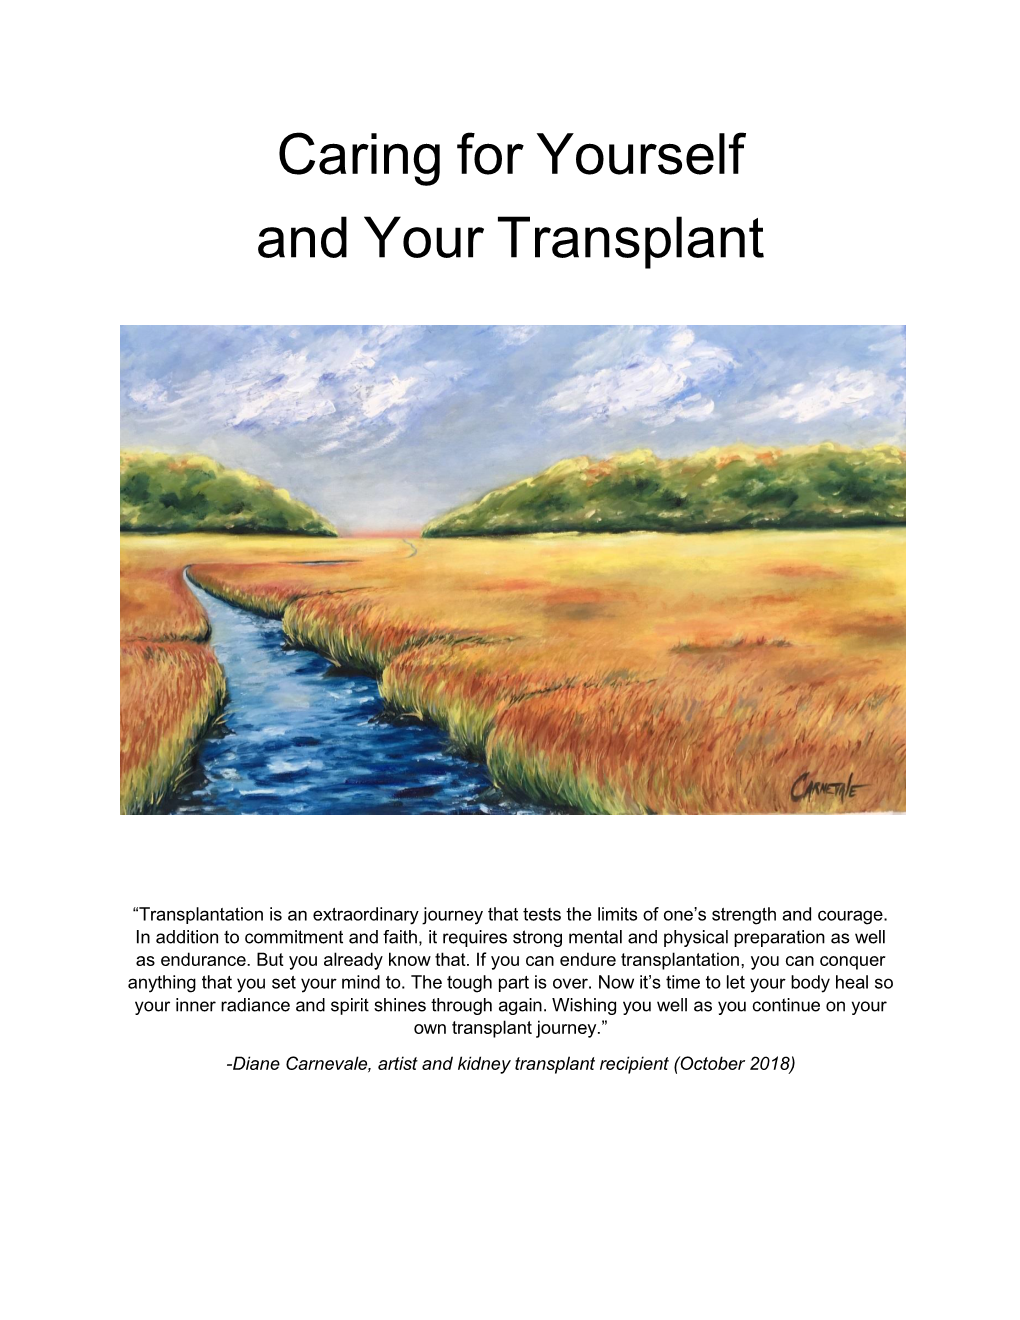 Caring for Yourself and Your Transplant